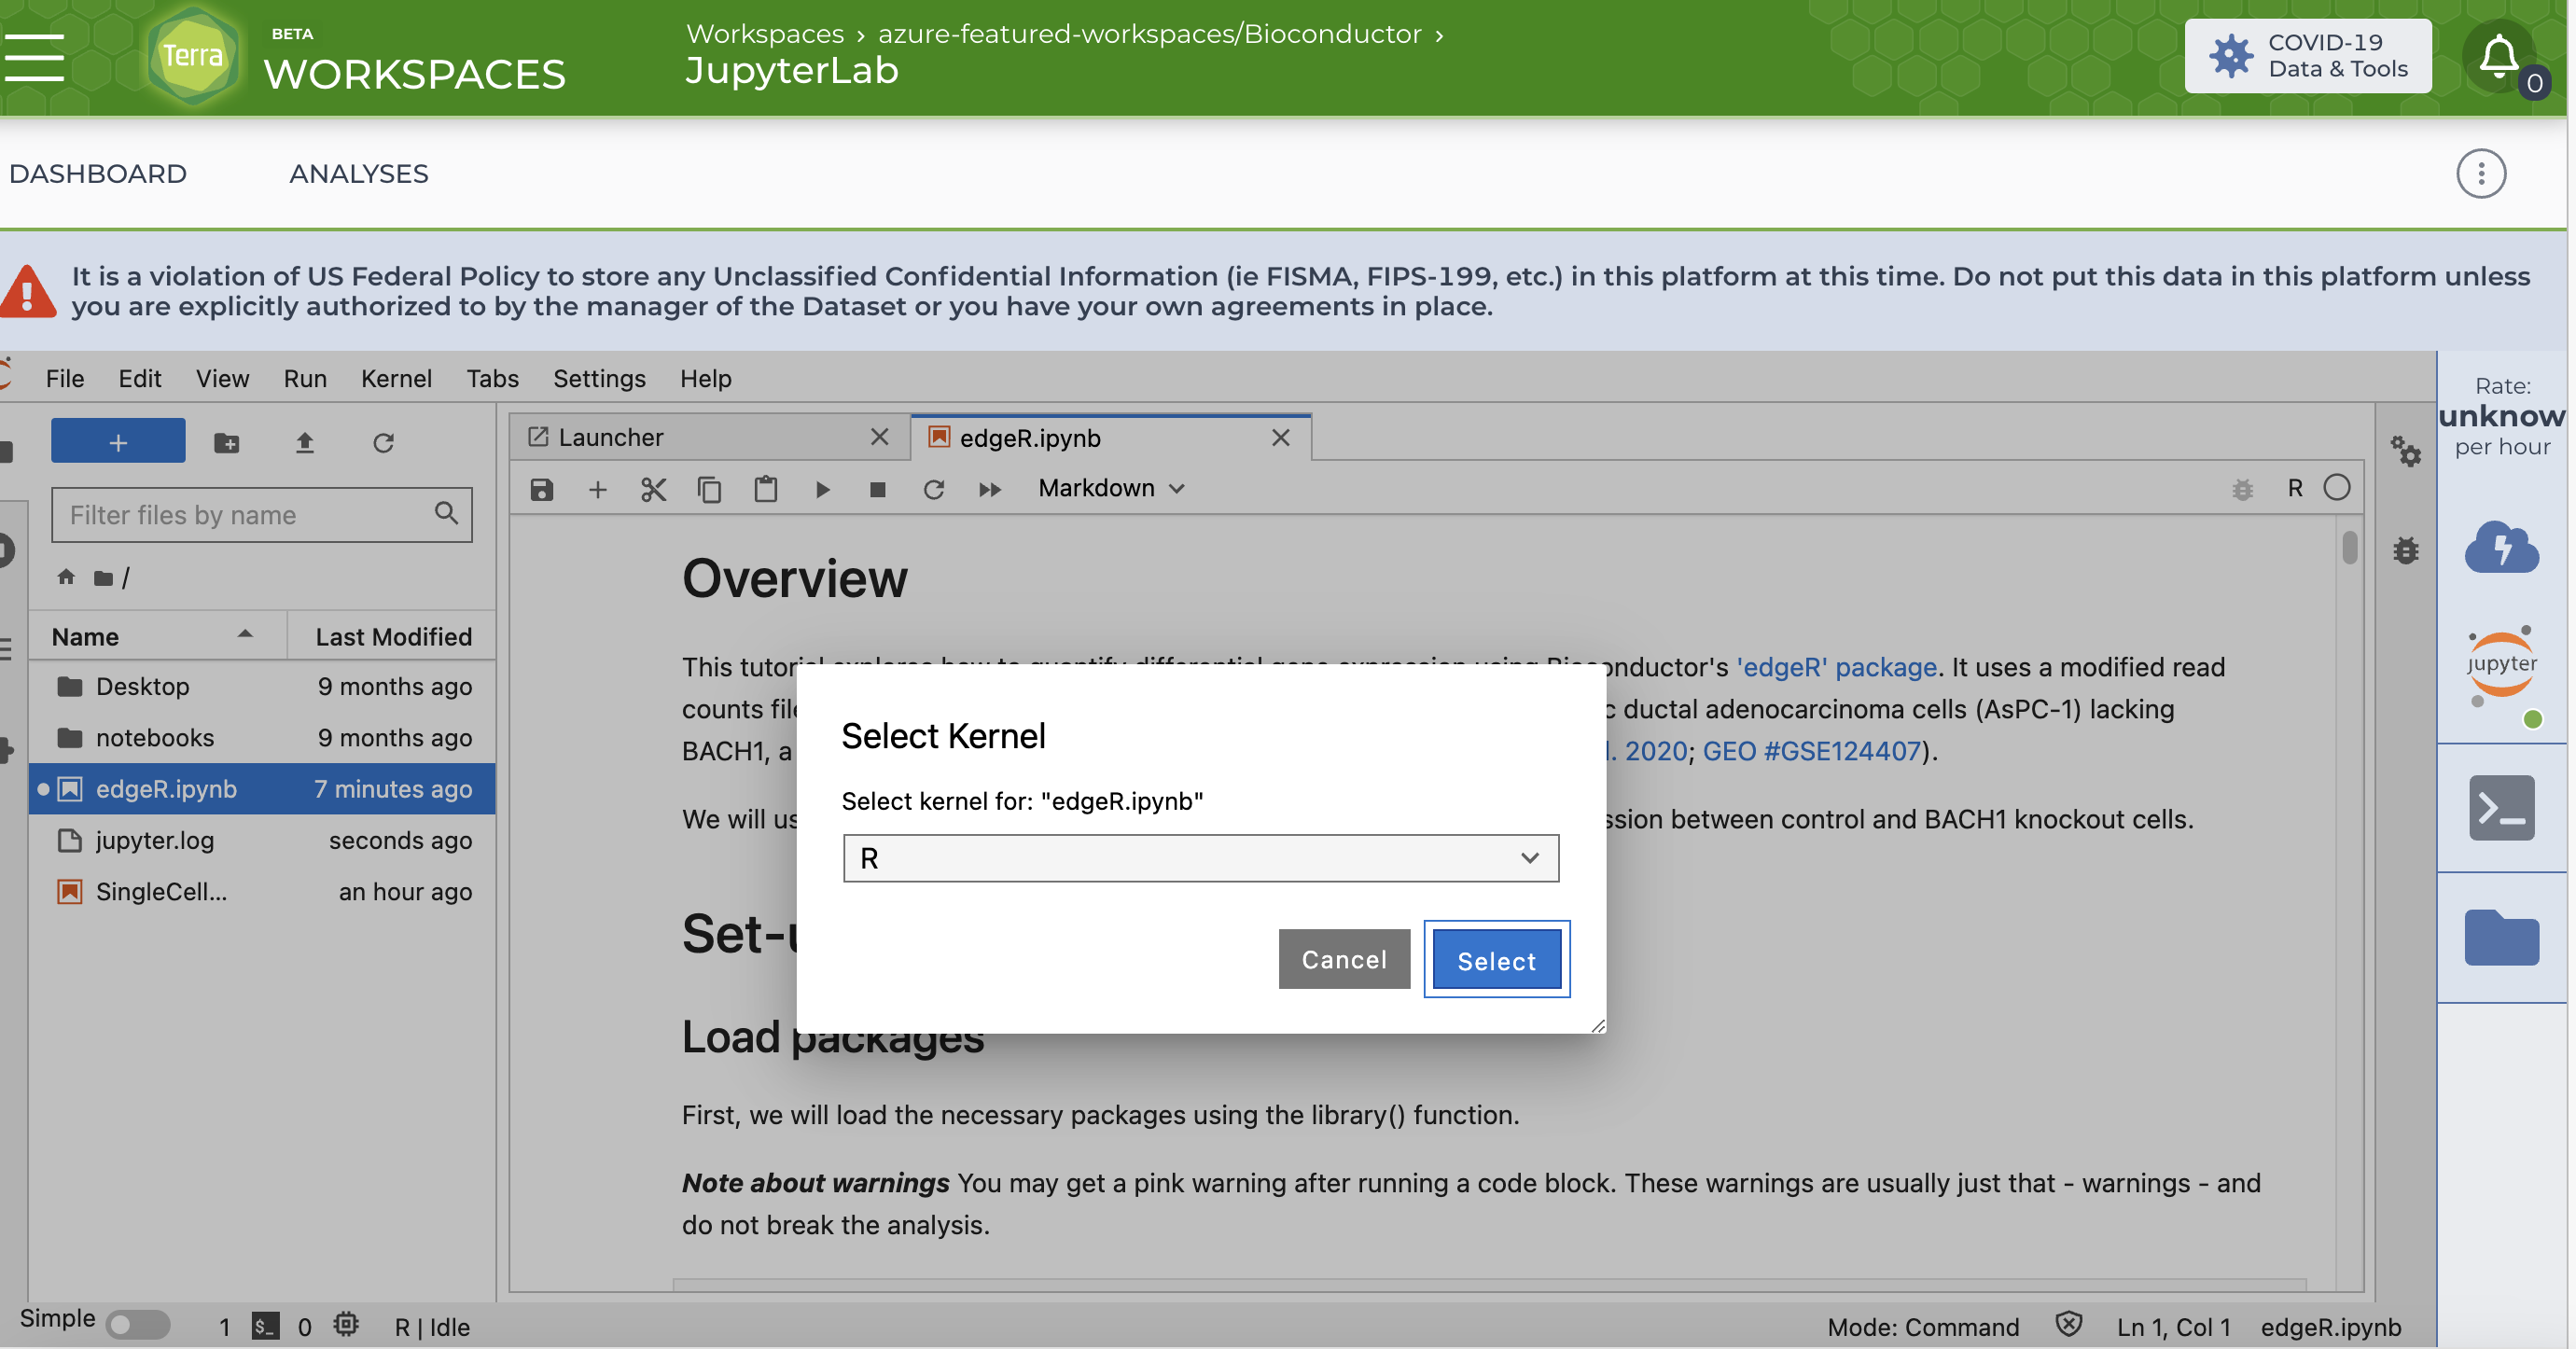 Screenshot of the edgeR notebook in JupyterLab with a select kernel popup in the center and R in the select kernel field